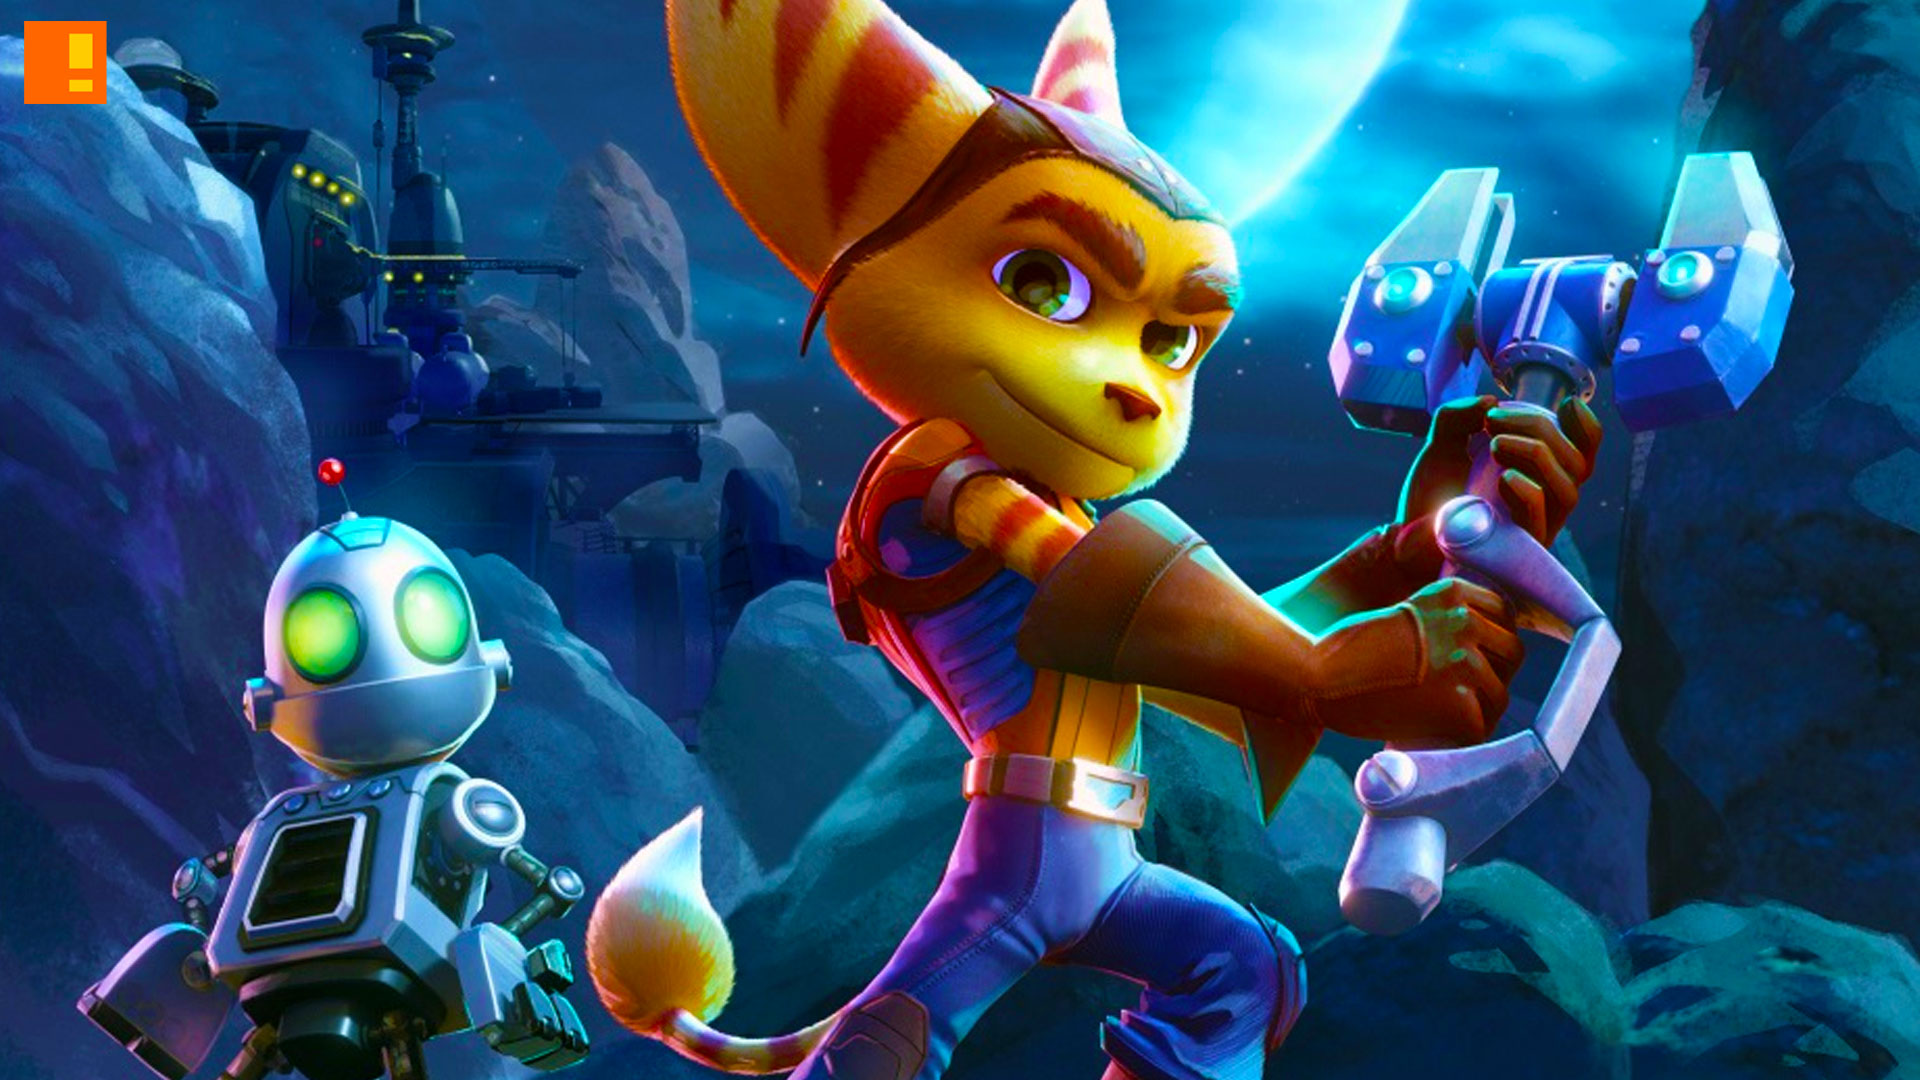 ratchet and clank, insomniac games, ratchet, clank, patch, spoilers, feature, animation, game